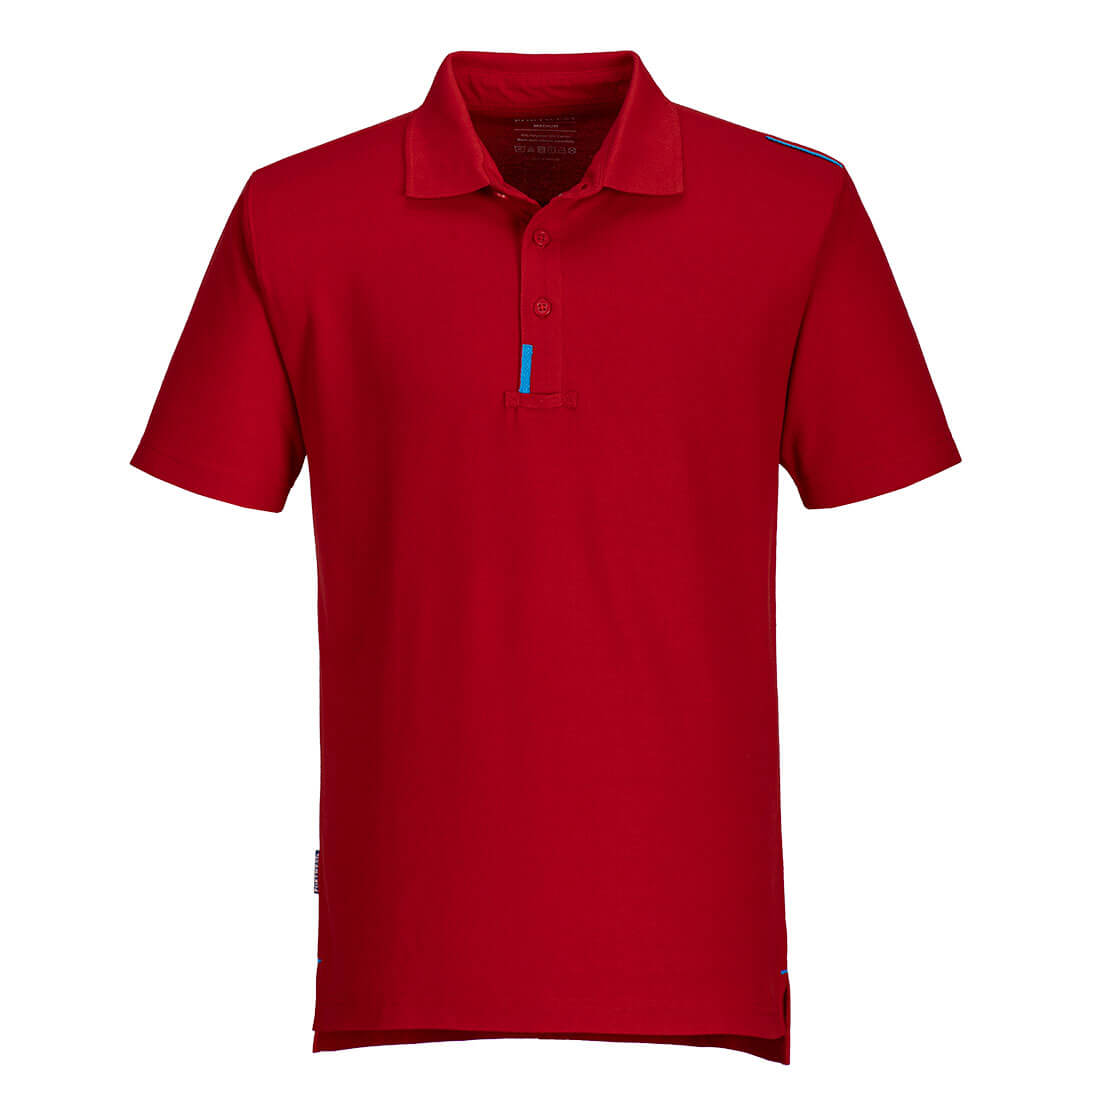 WX3 Polo Shirt T720 Deep Red Size L Fit R